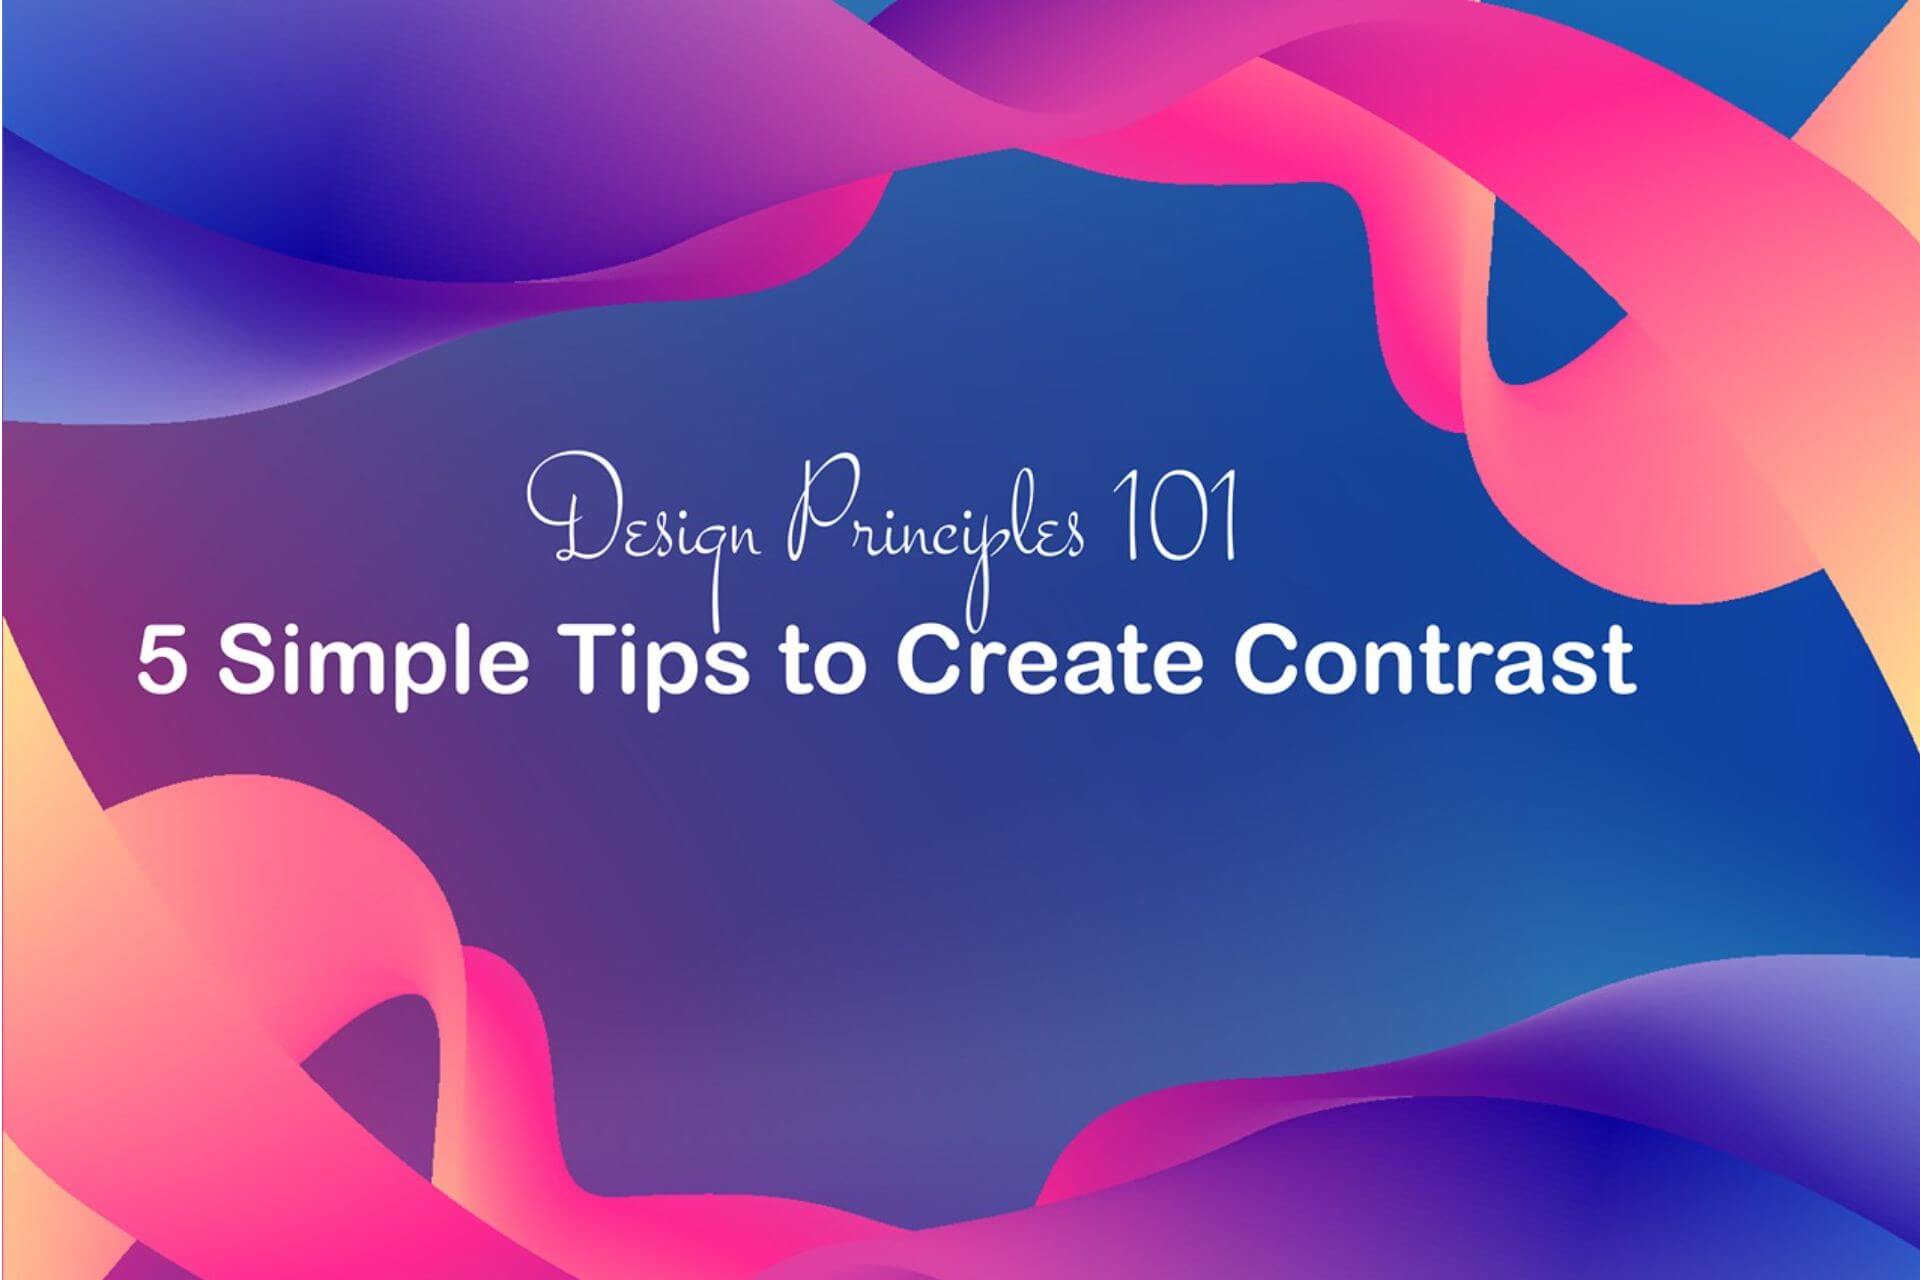 Design Principles 101: 5 Useful Tips to Create Contrast in Design for Beginners